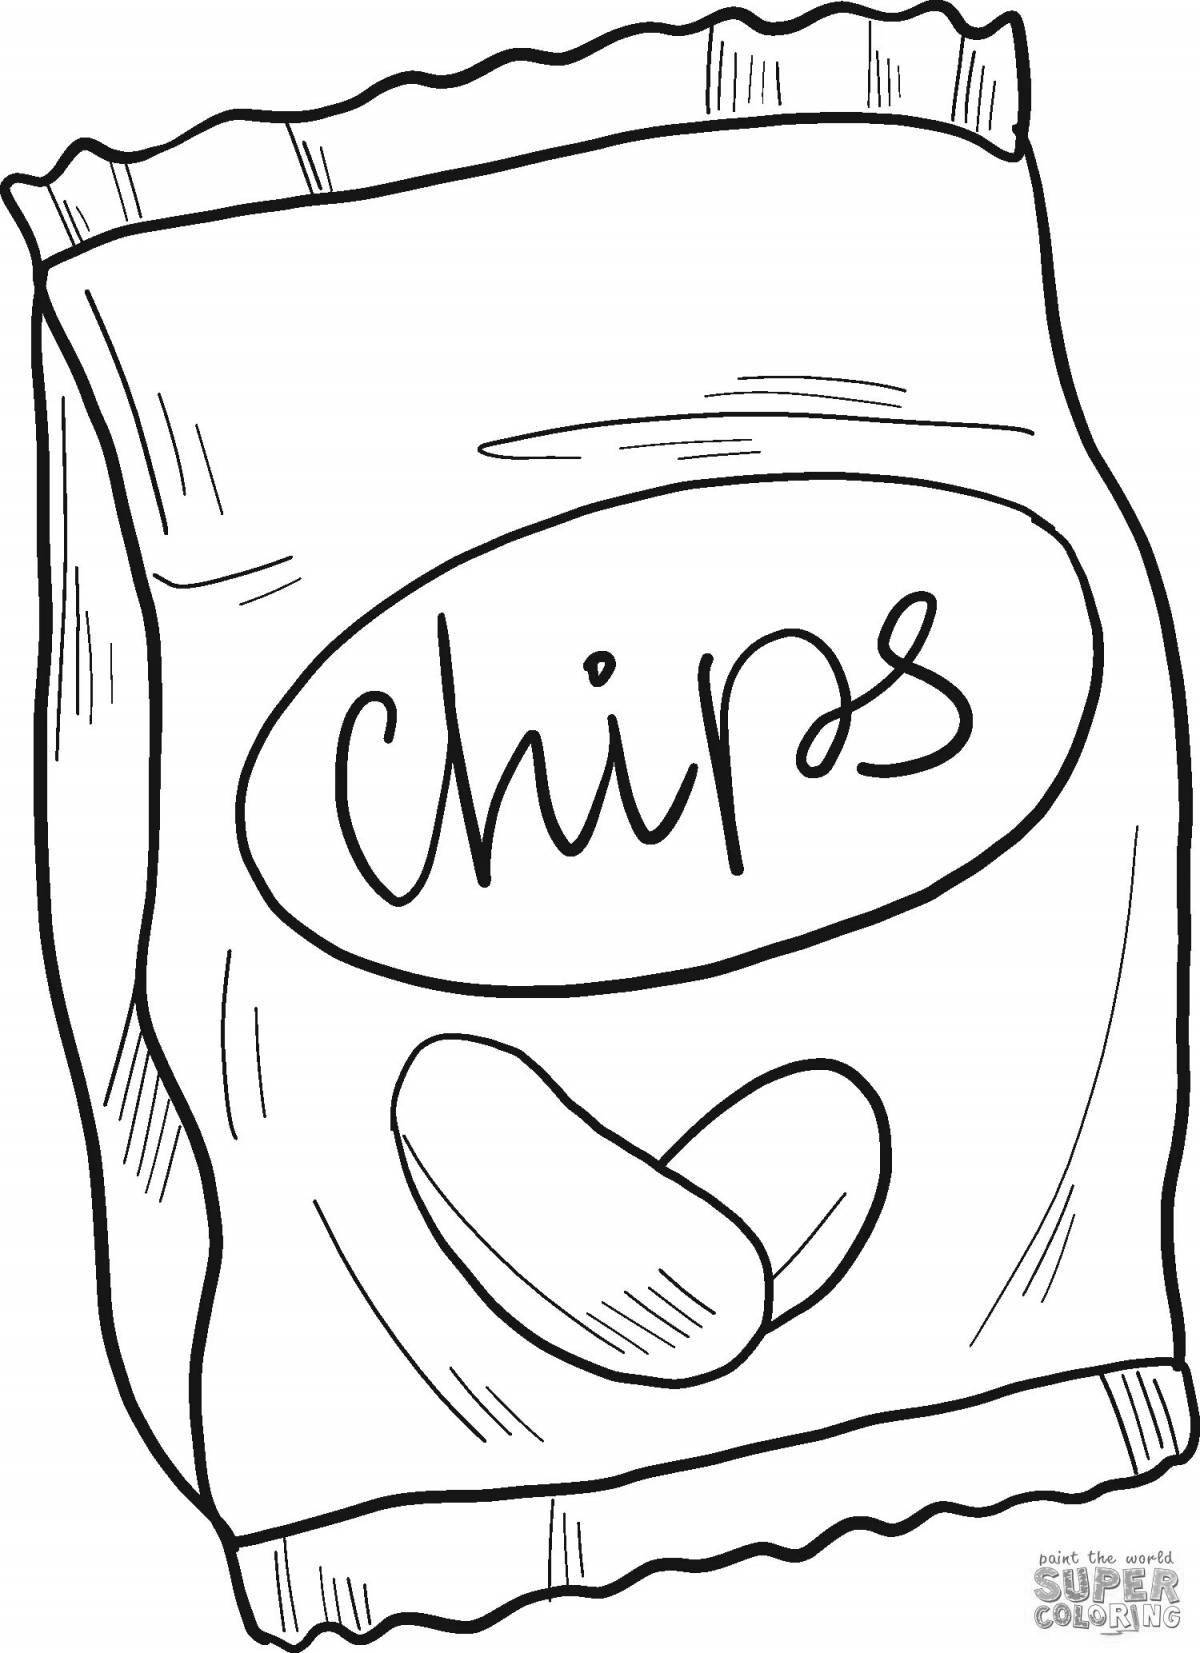 Coloring page intriguing lace chips